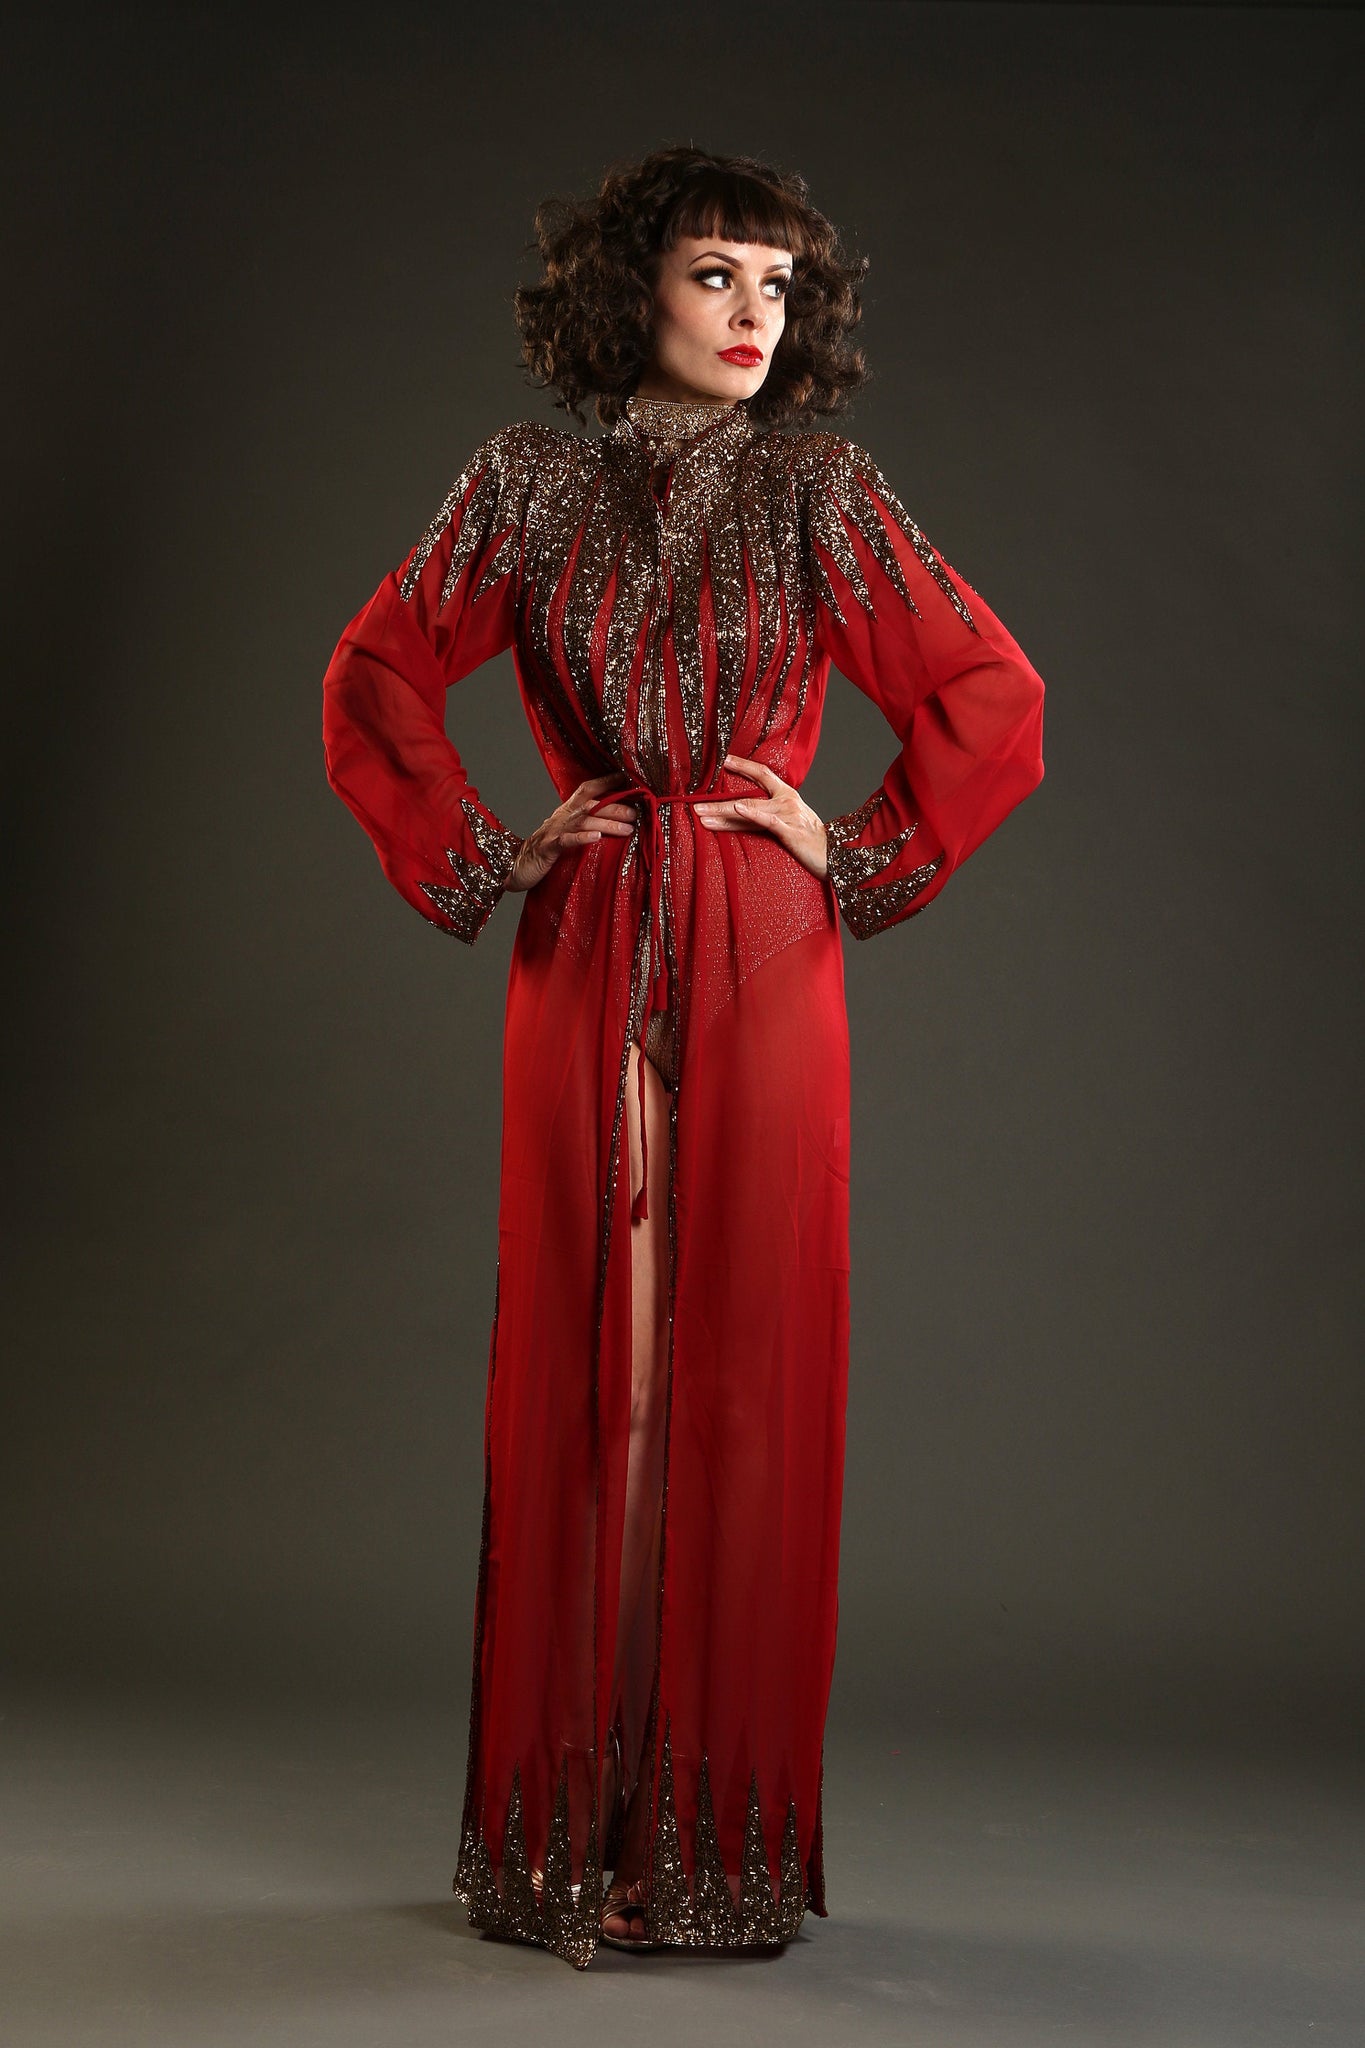 Dark red Embellished Gown Overcoat circus costume 1920 showgirl